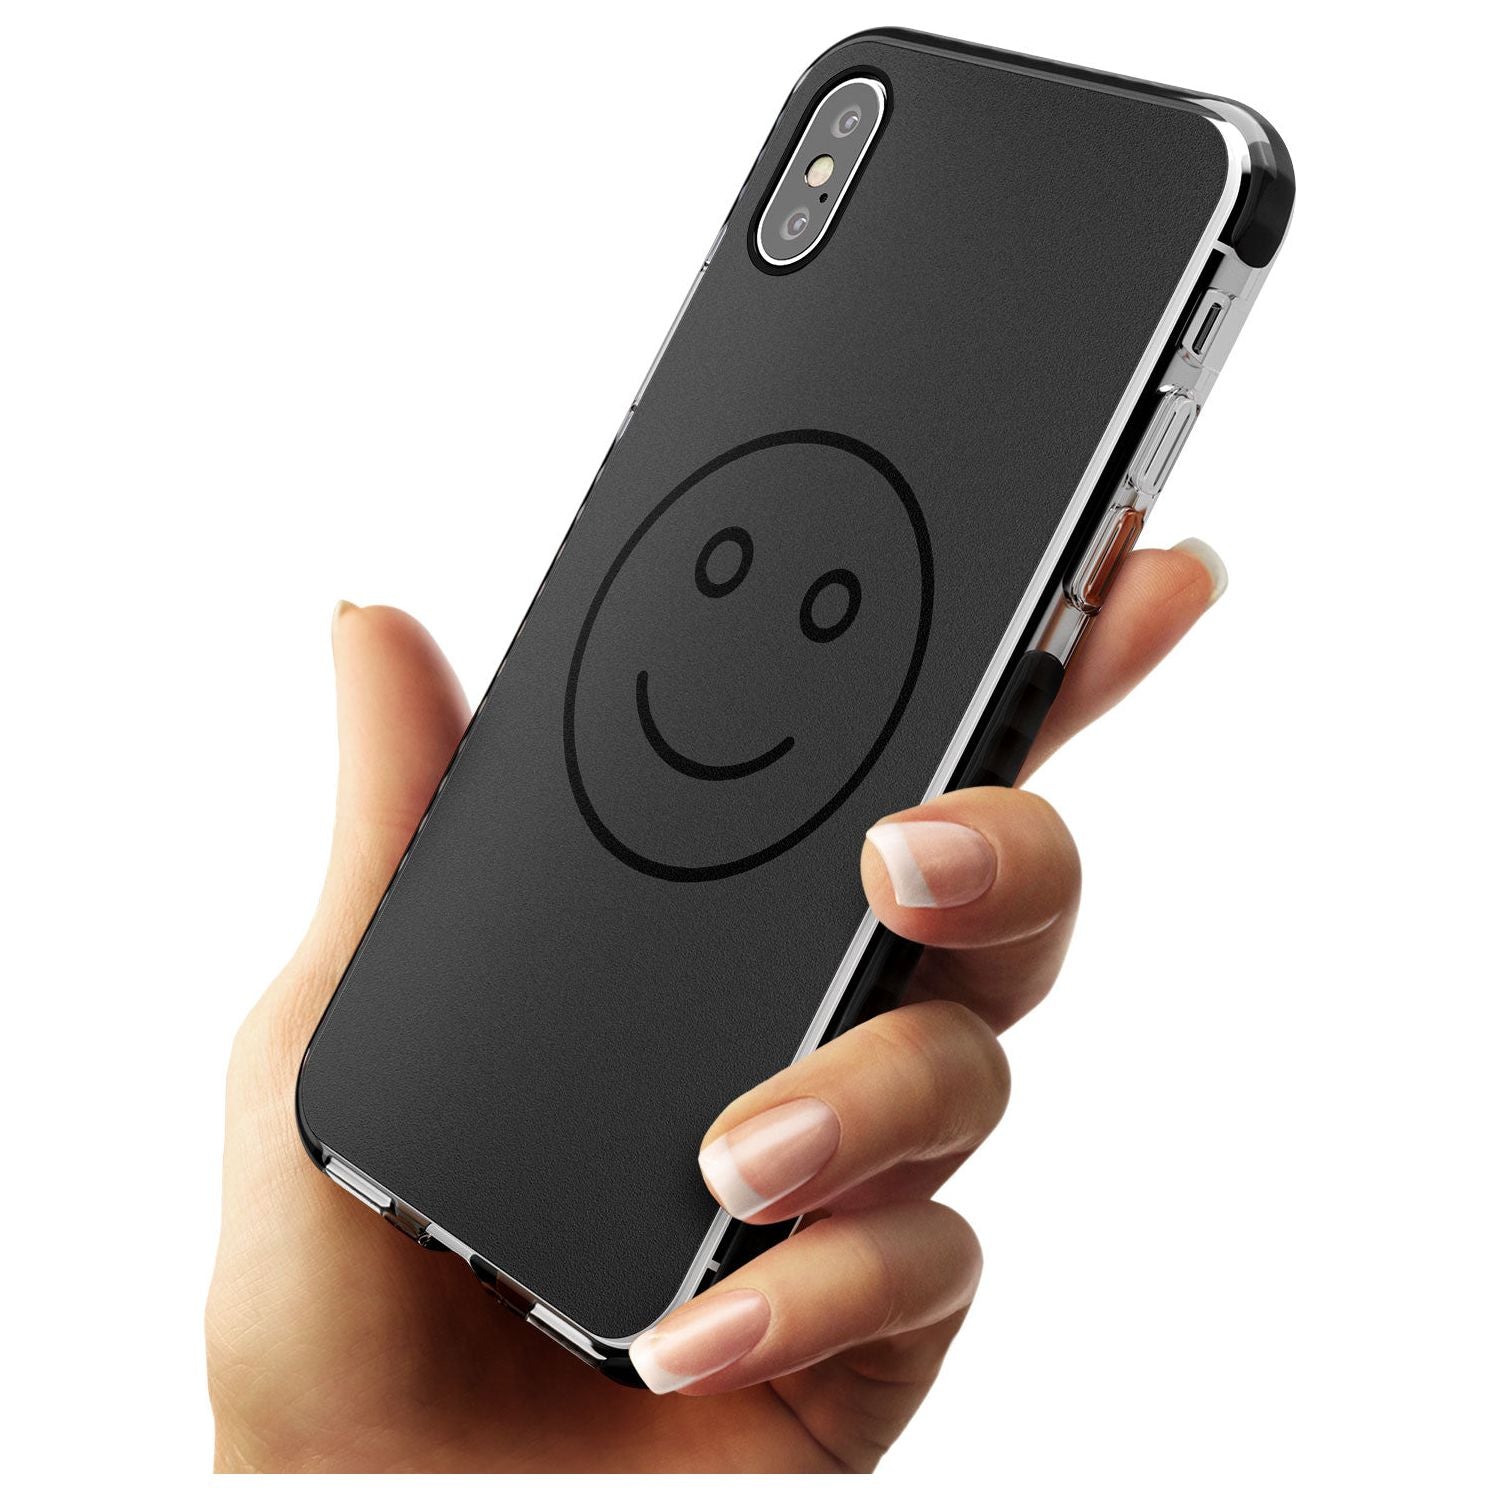 Dark Smiley Face Black Impact Phone Case for iPhone X XS Max XR